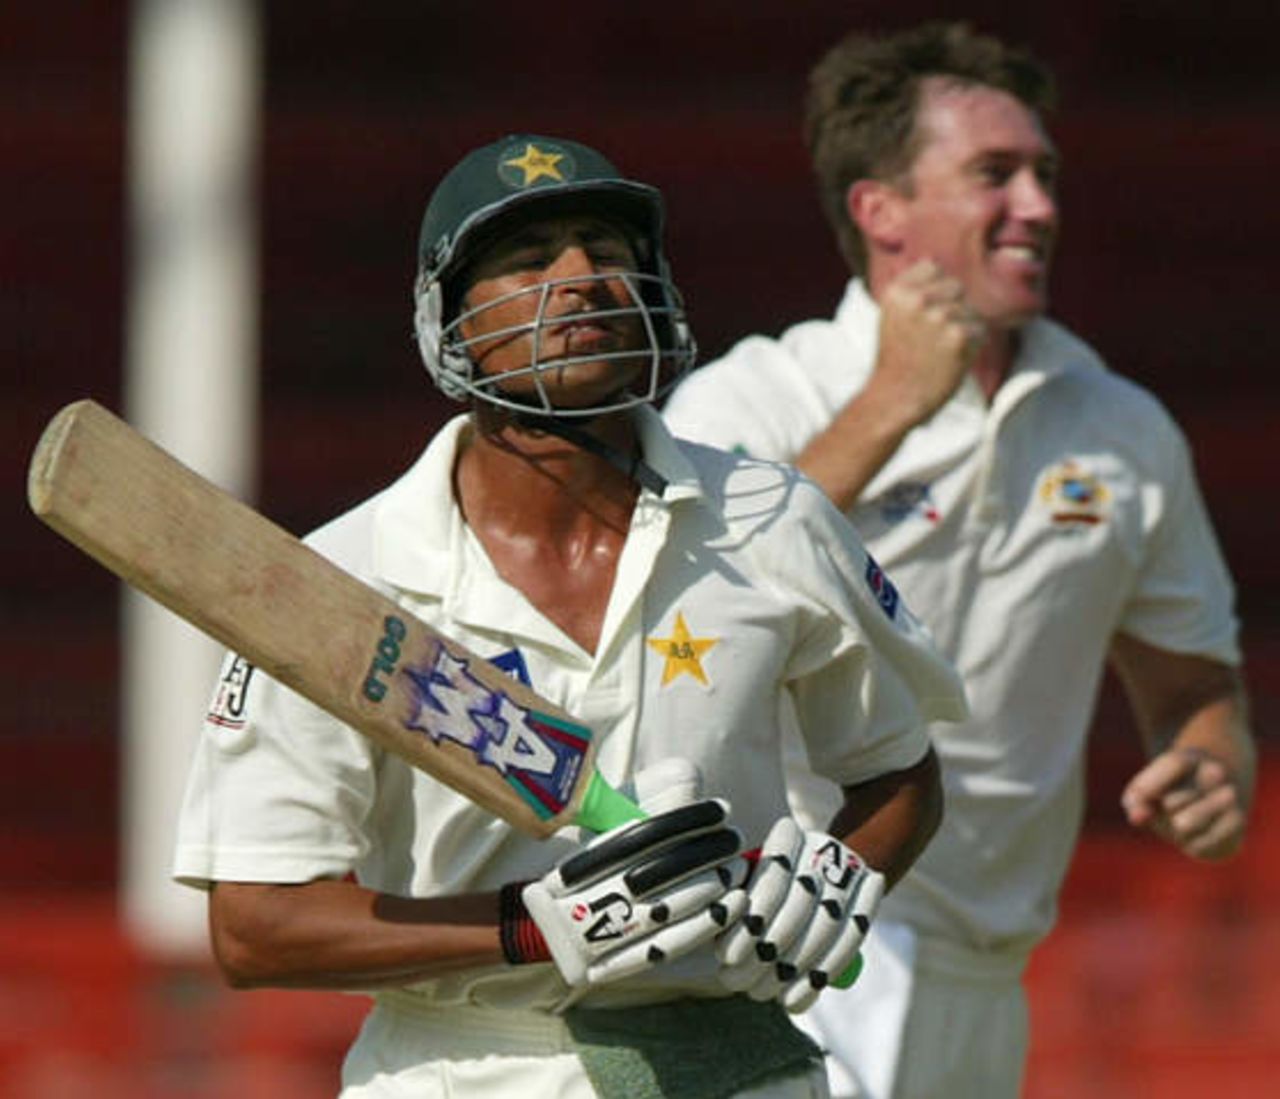 Pakistan's vice captain Younis Khan (L) grimaces after his dismissal by LBW as Australian fast bowler Glenn McGrath celebrates at Sharjah's stadium October 12, 2002 on the second day of their second cricket test match. The second and third tests are being held in the neutral venue of Sharjah after Australia balked at playing in Pakistan due to security concerns.